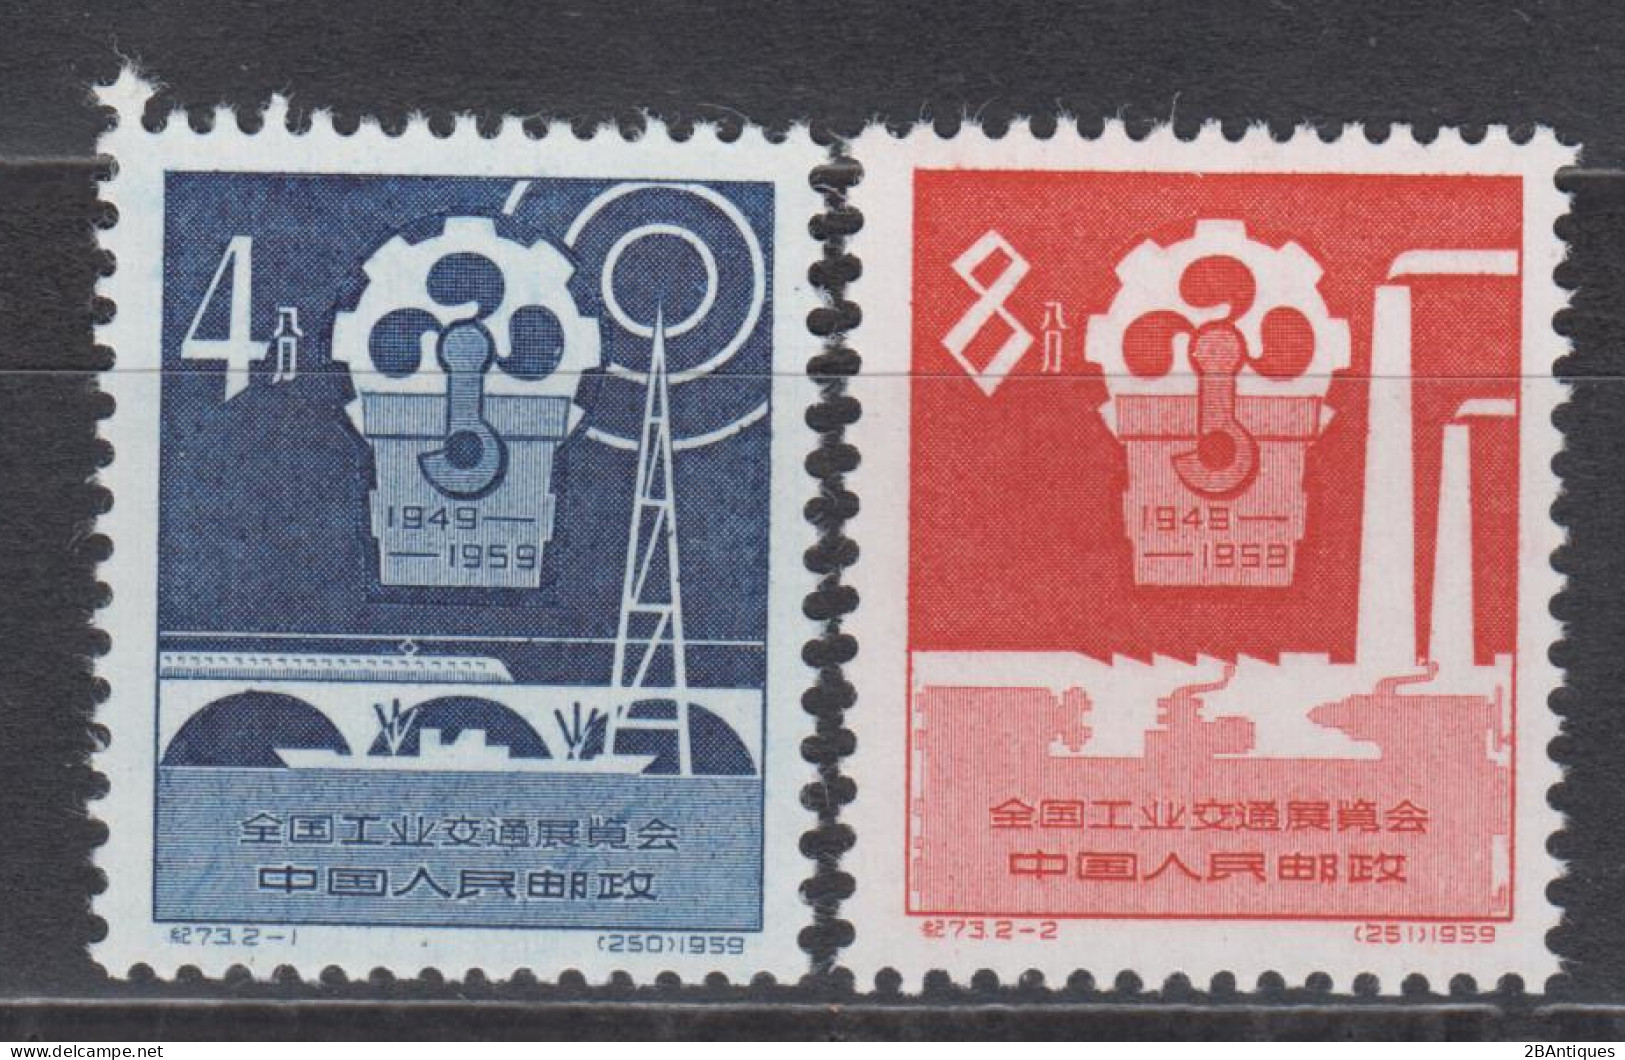 PR CHINA 1959 - National Exhibition Of Industry And Communications MNH** XF - Ungebraucht